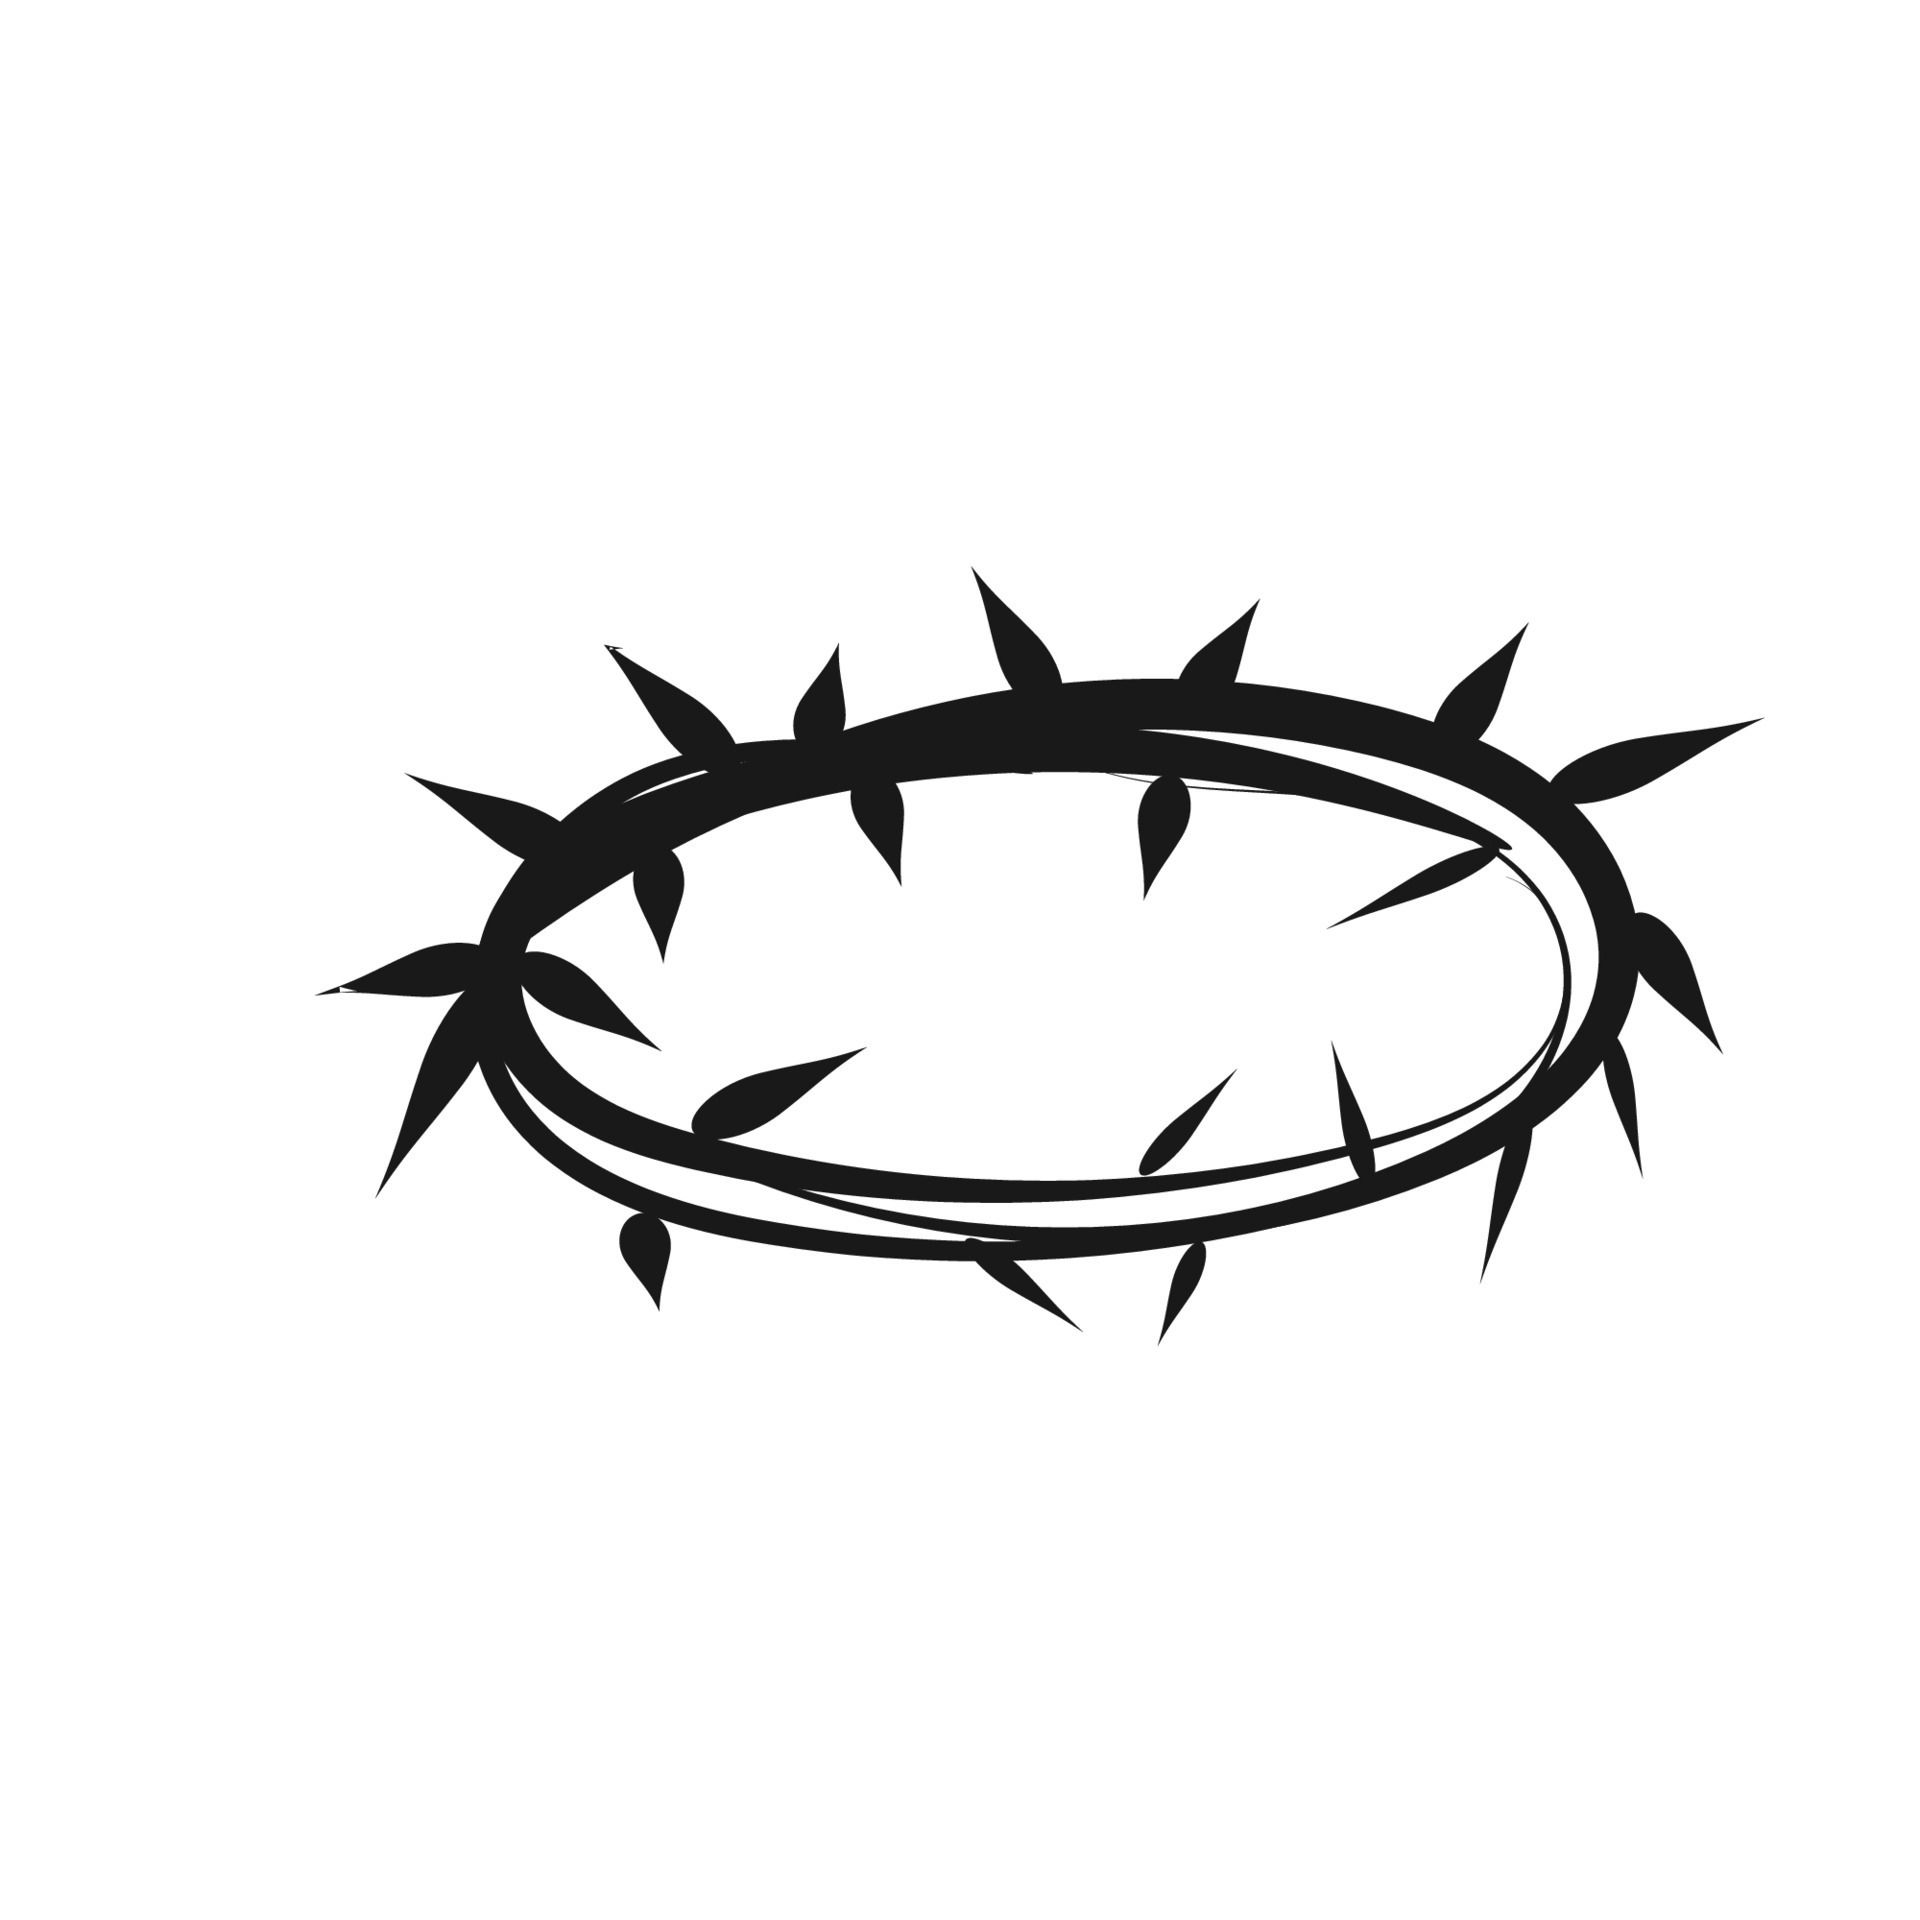 32 Awesome Crown of Thorns Tattoo Design Ideas and Meanings For 2022